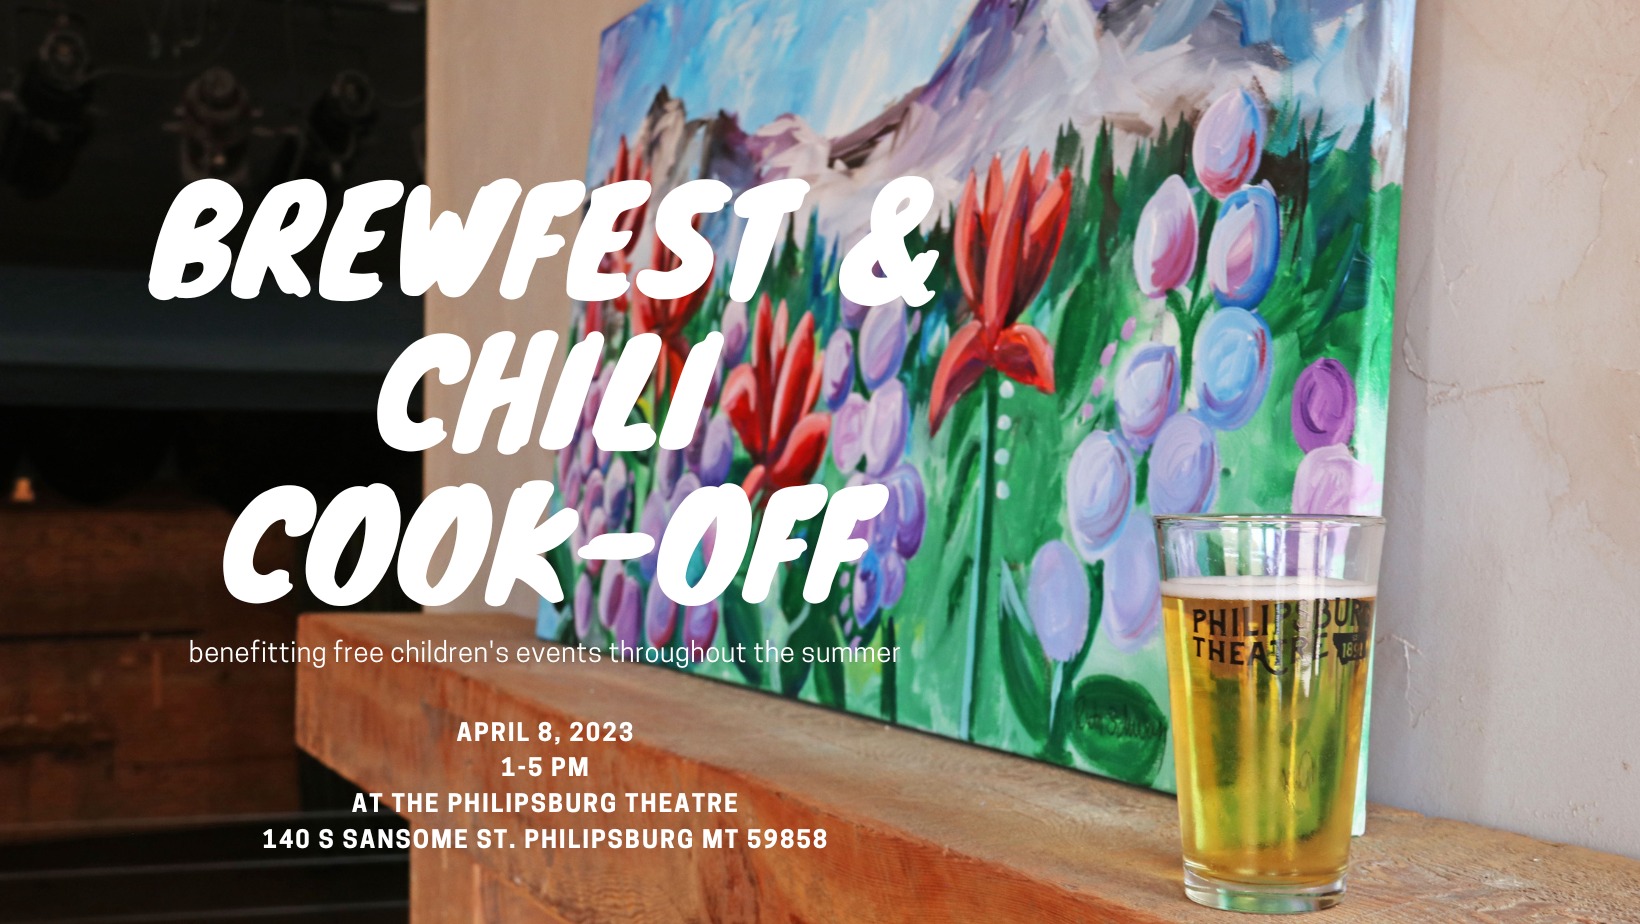 Brewfest & Chili Cook-Off at the Historic Philipsburg Theatre in Philipsburg, Montana on Saturday, April 8, 2023 from 1:00 pm to 5:00 pm